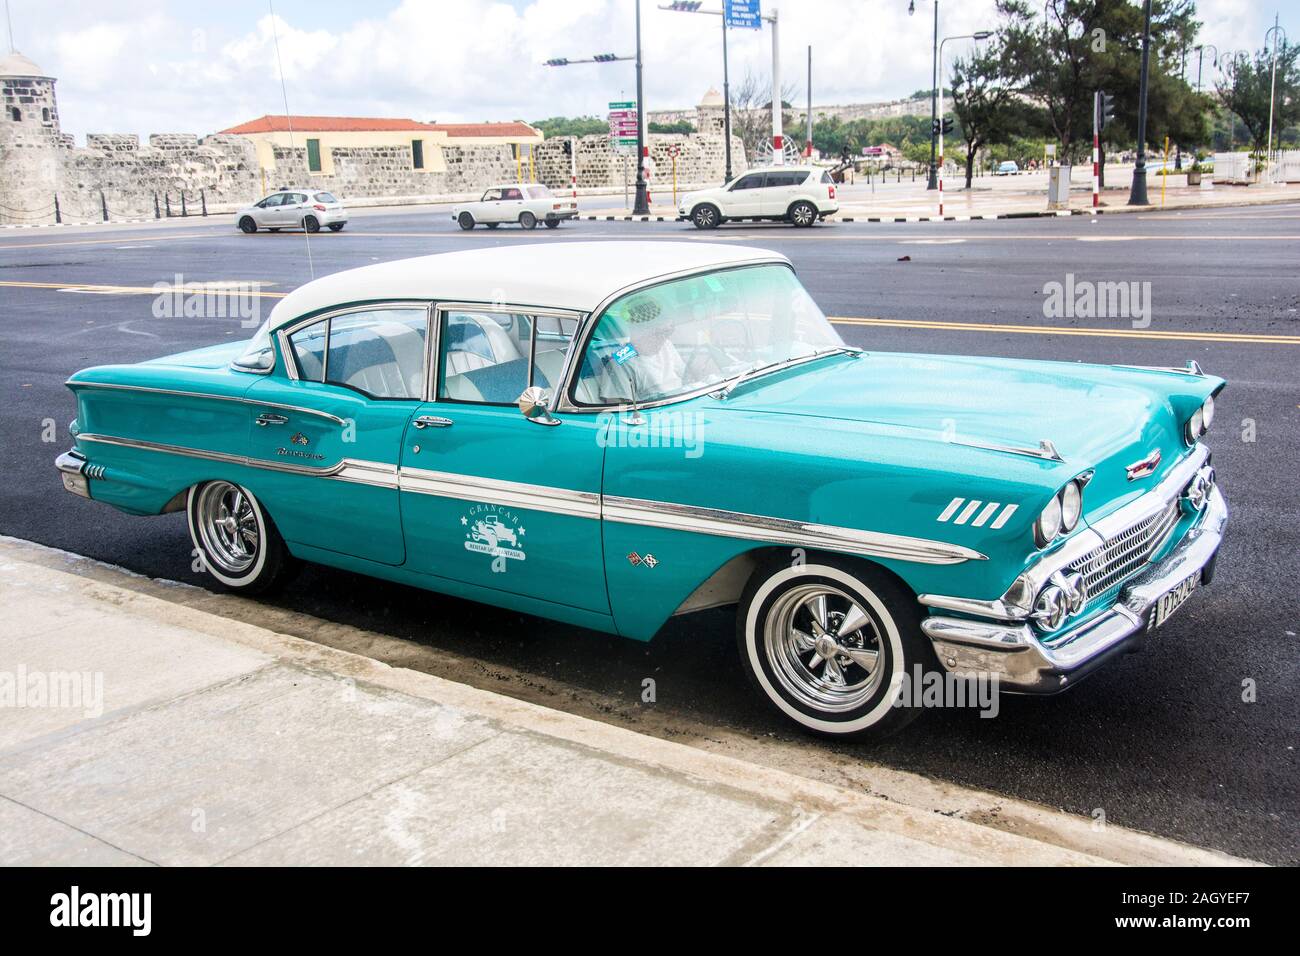 A classic, vintage car, painted turquoise, parked in the Old Town part  of the city of Havana, Cuba Stock Photo